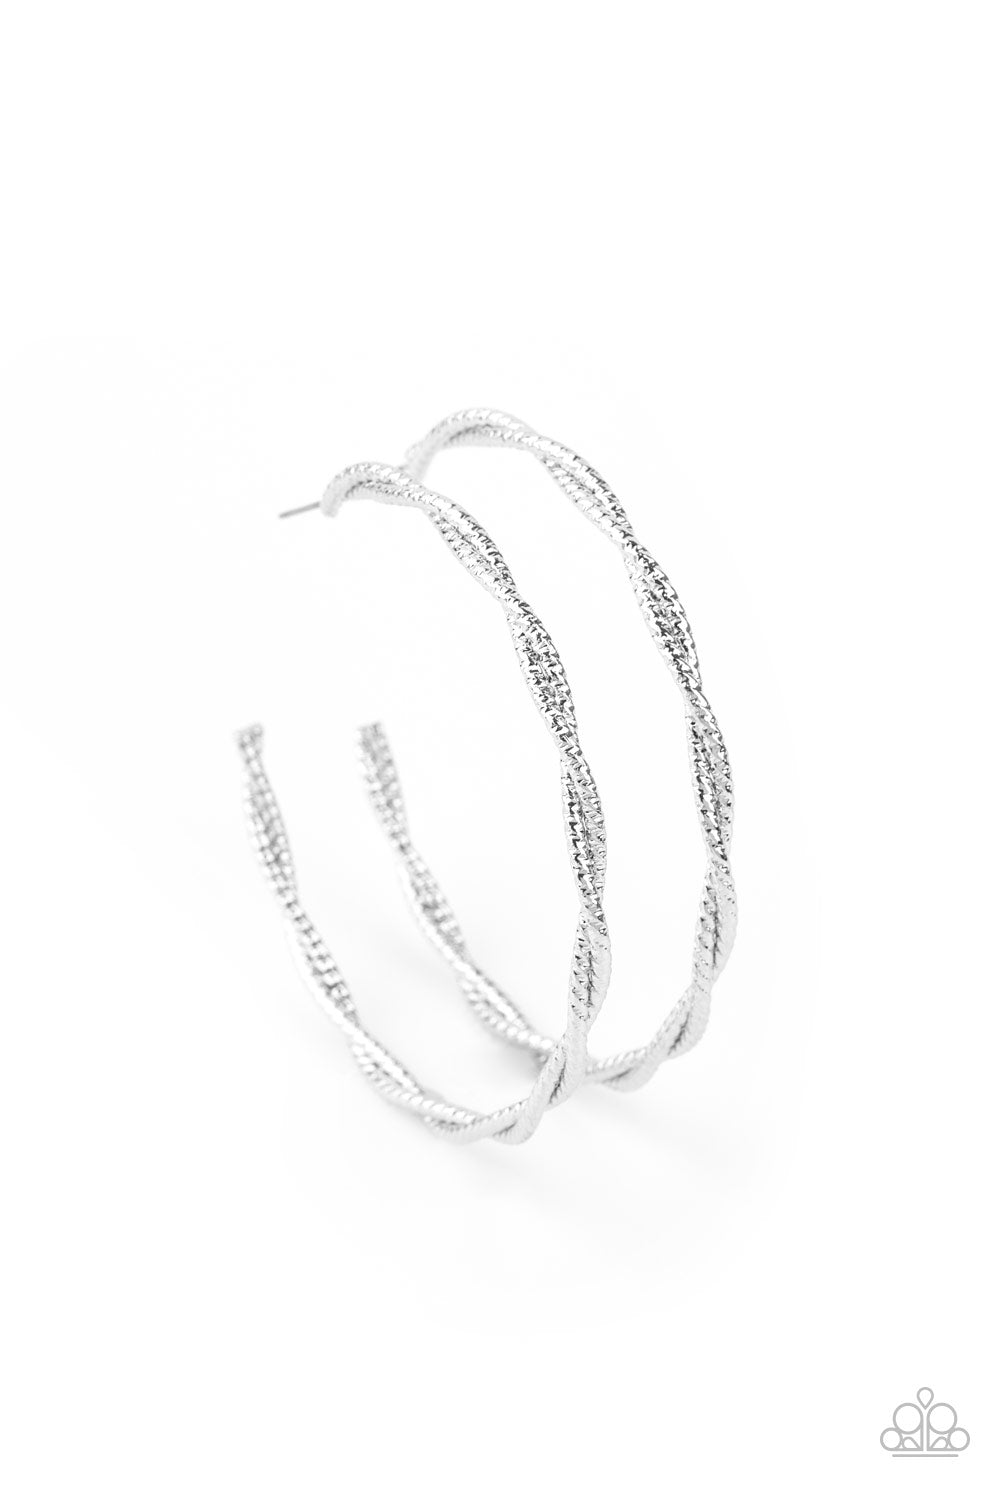 Paparazzi Totally Throttled - Silver Hoop Earrings - A Finishing Touch 